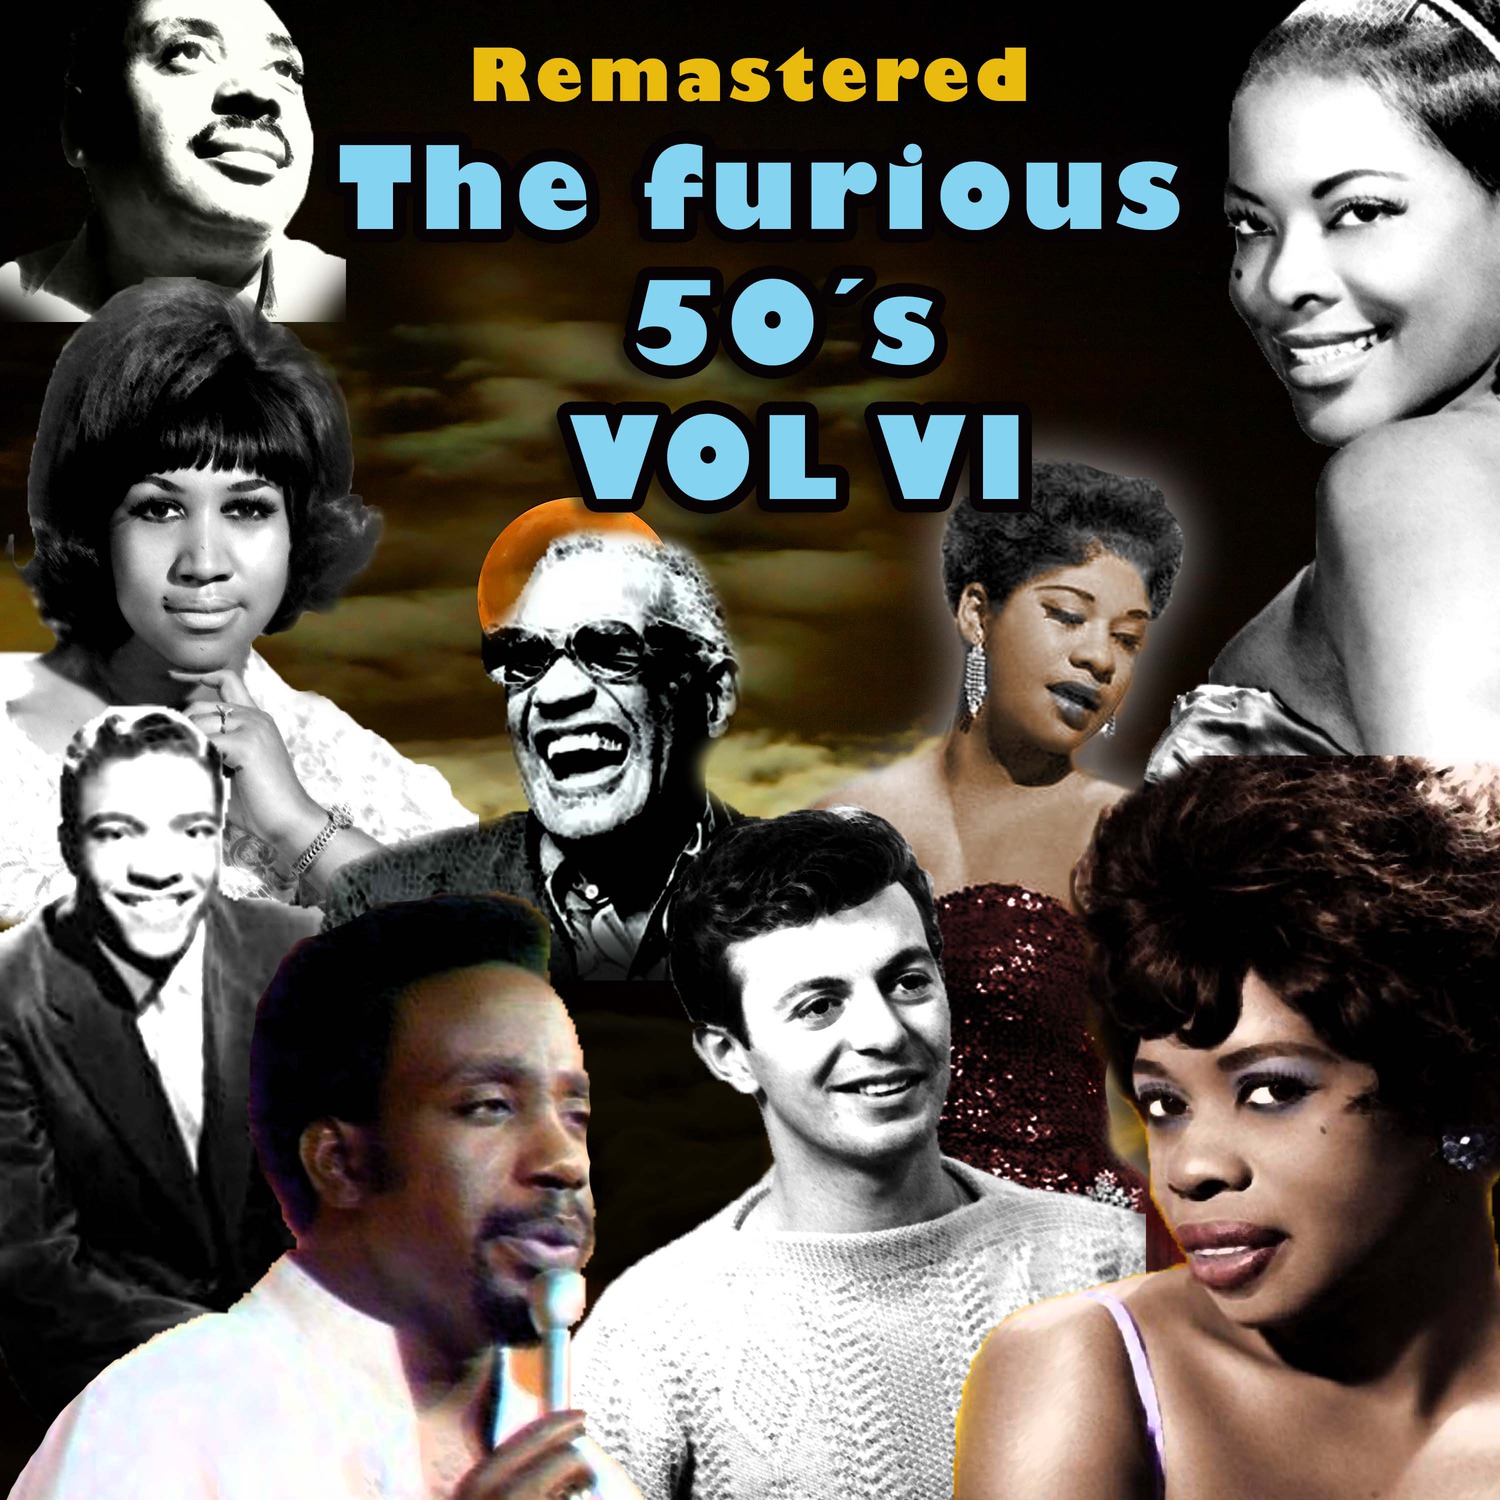 The Furious 50's, Vol. VI (Remastered)